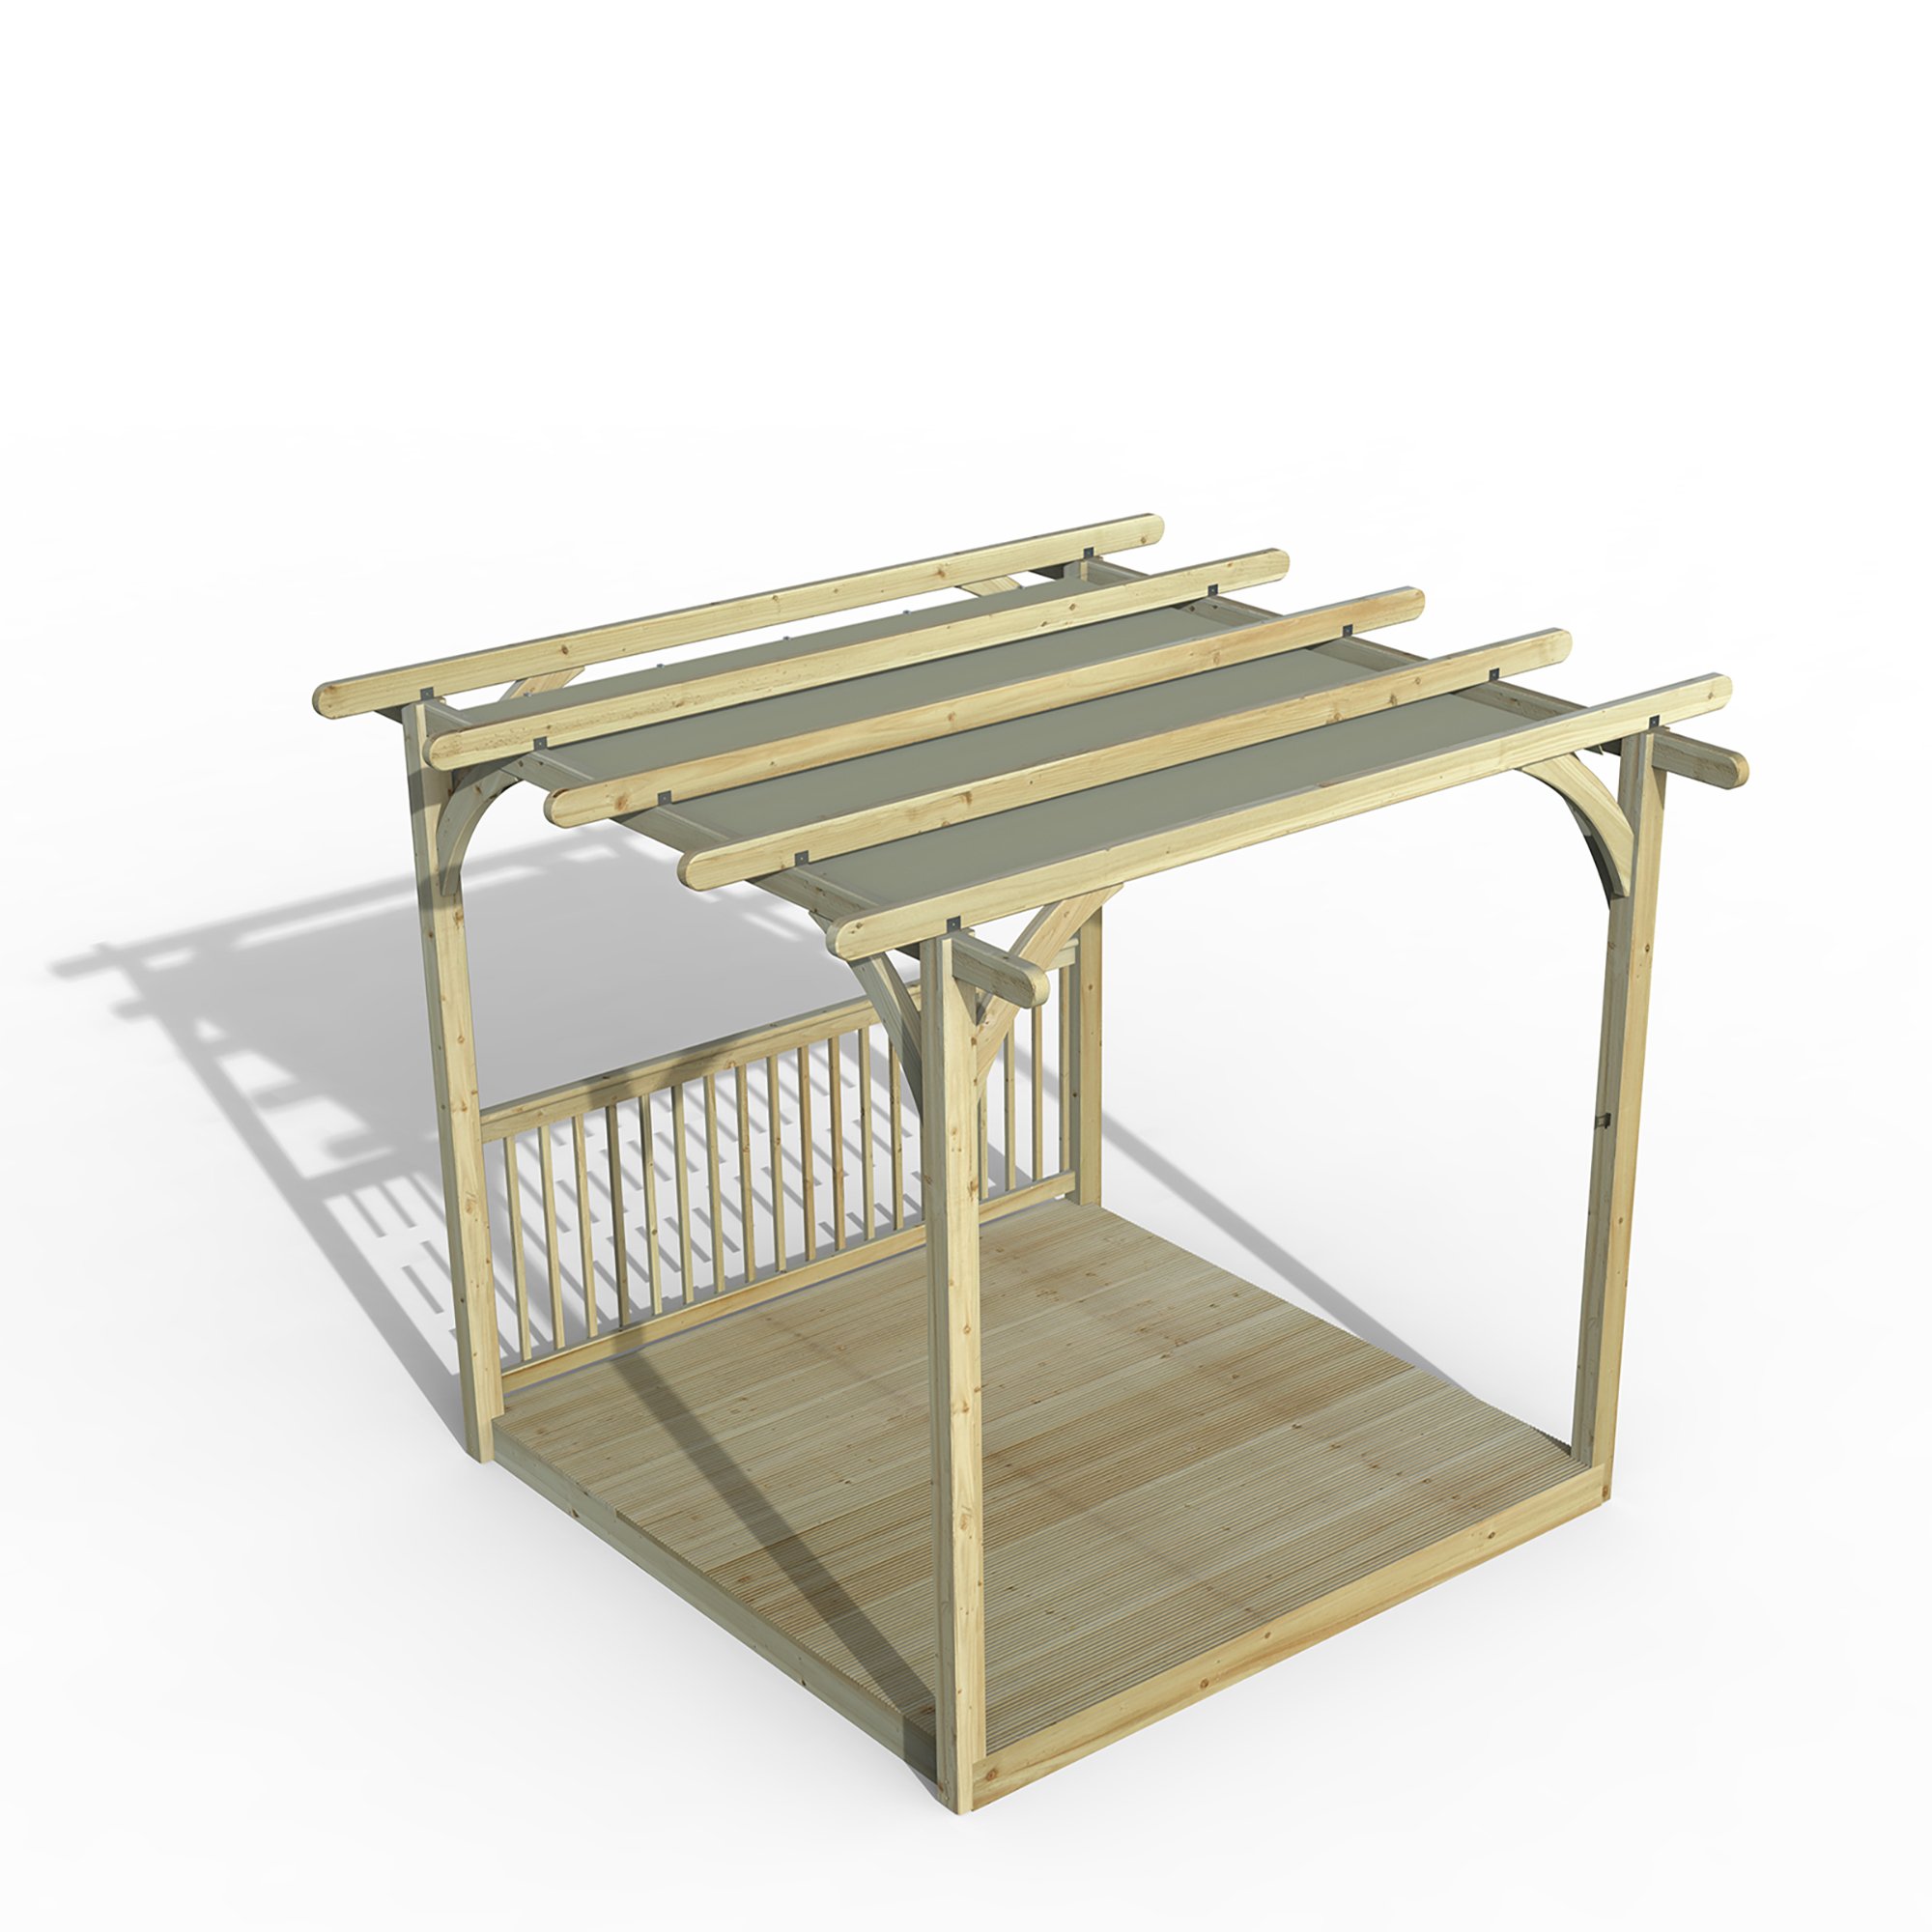 Forest Garden 2.4 x 2.4m Ultima Pergola and Decking Kit with 1 x Balustrade and Canopy